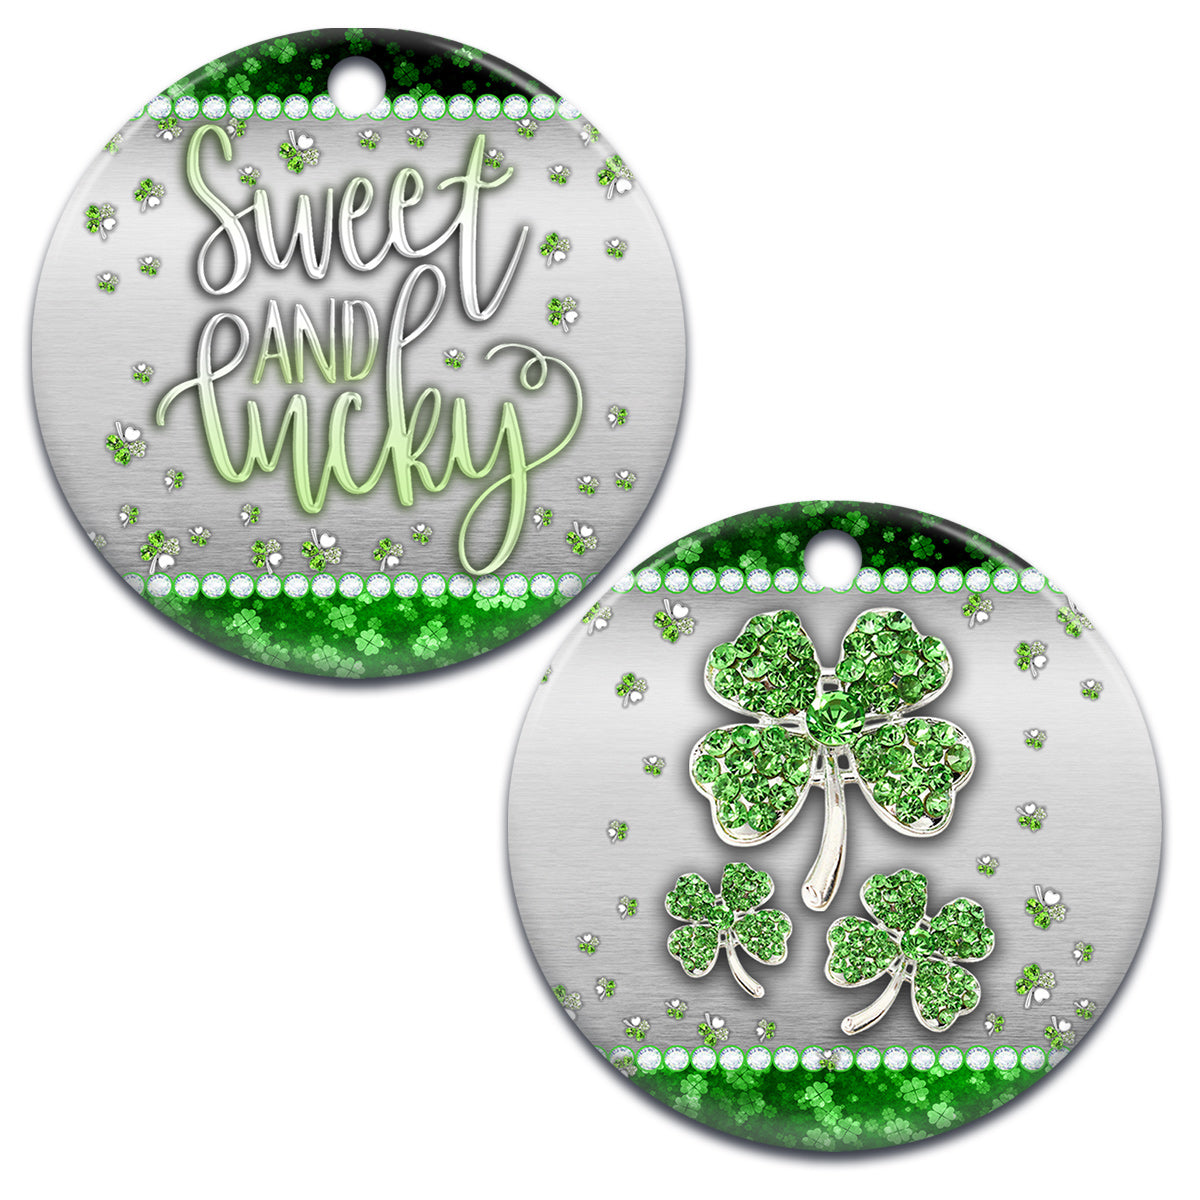 St Patricks Day Jewelry Clover Sweet And Lucky Ceramic Circle Ornament - Decorative Ornament - Christmas Ornament